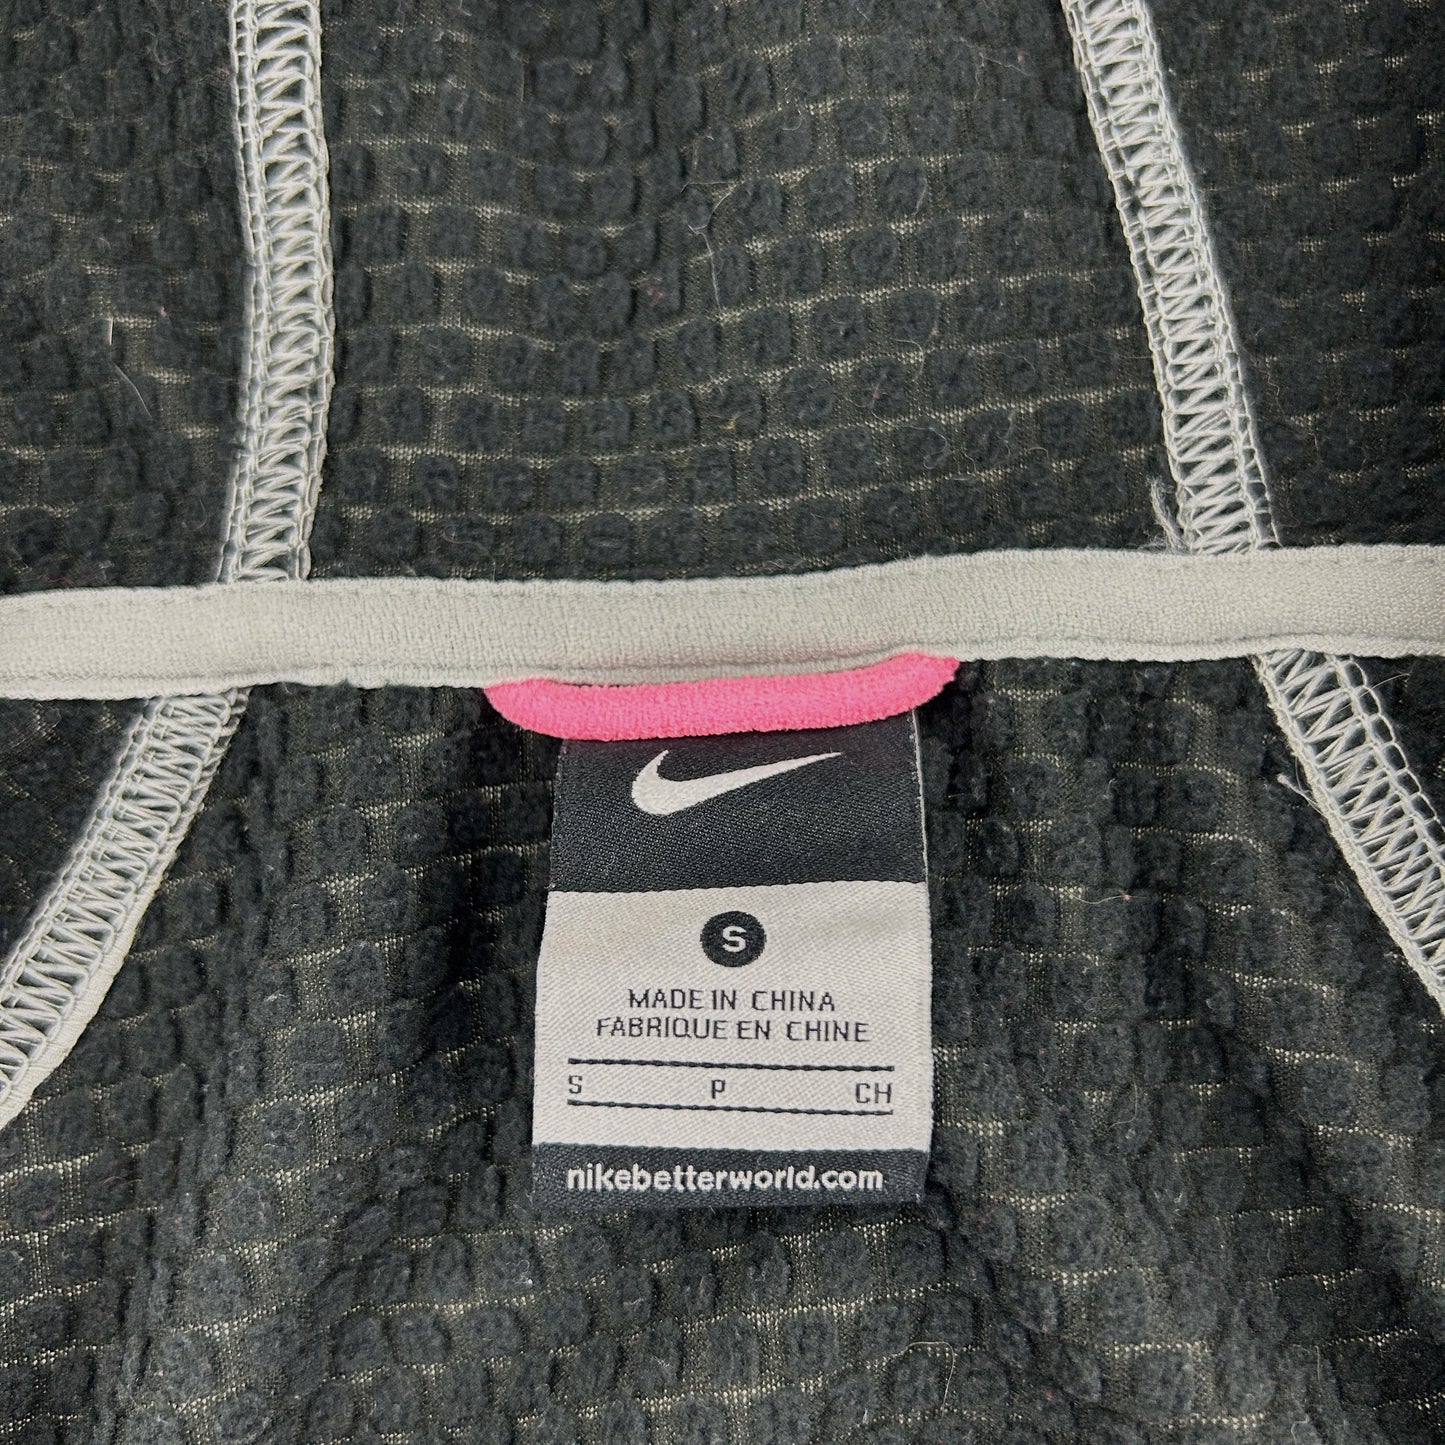 Nike Soft Shell Jacket Size S - Known Source